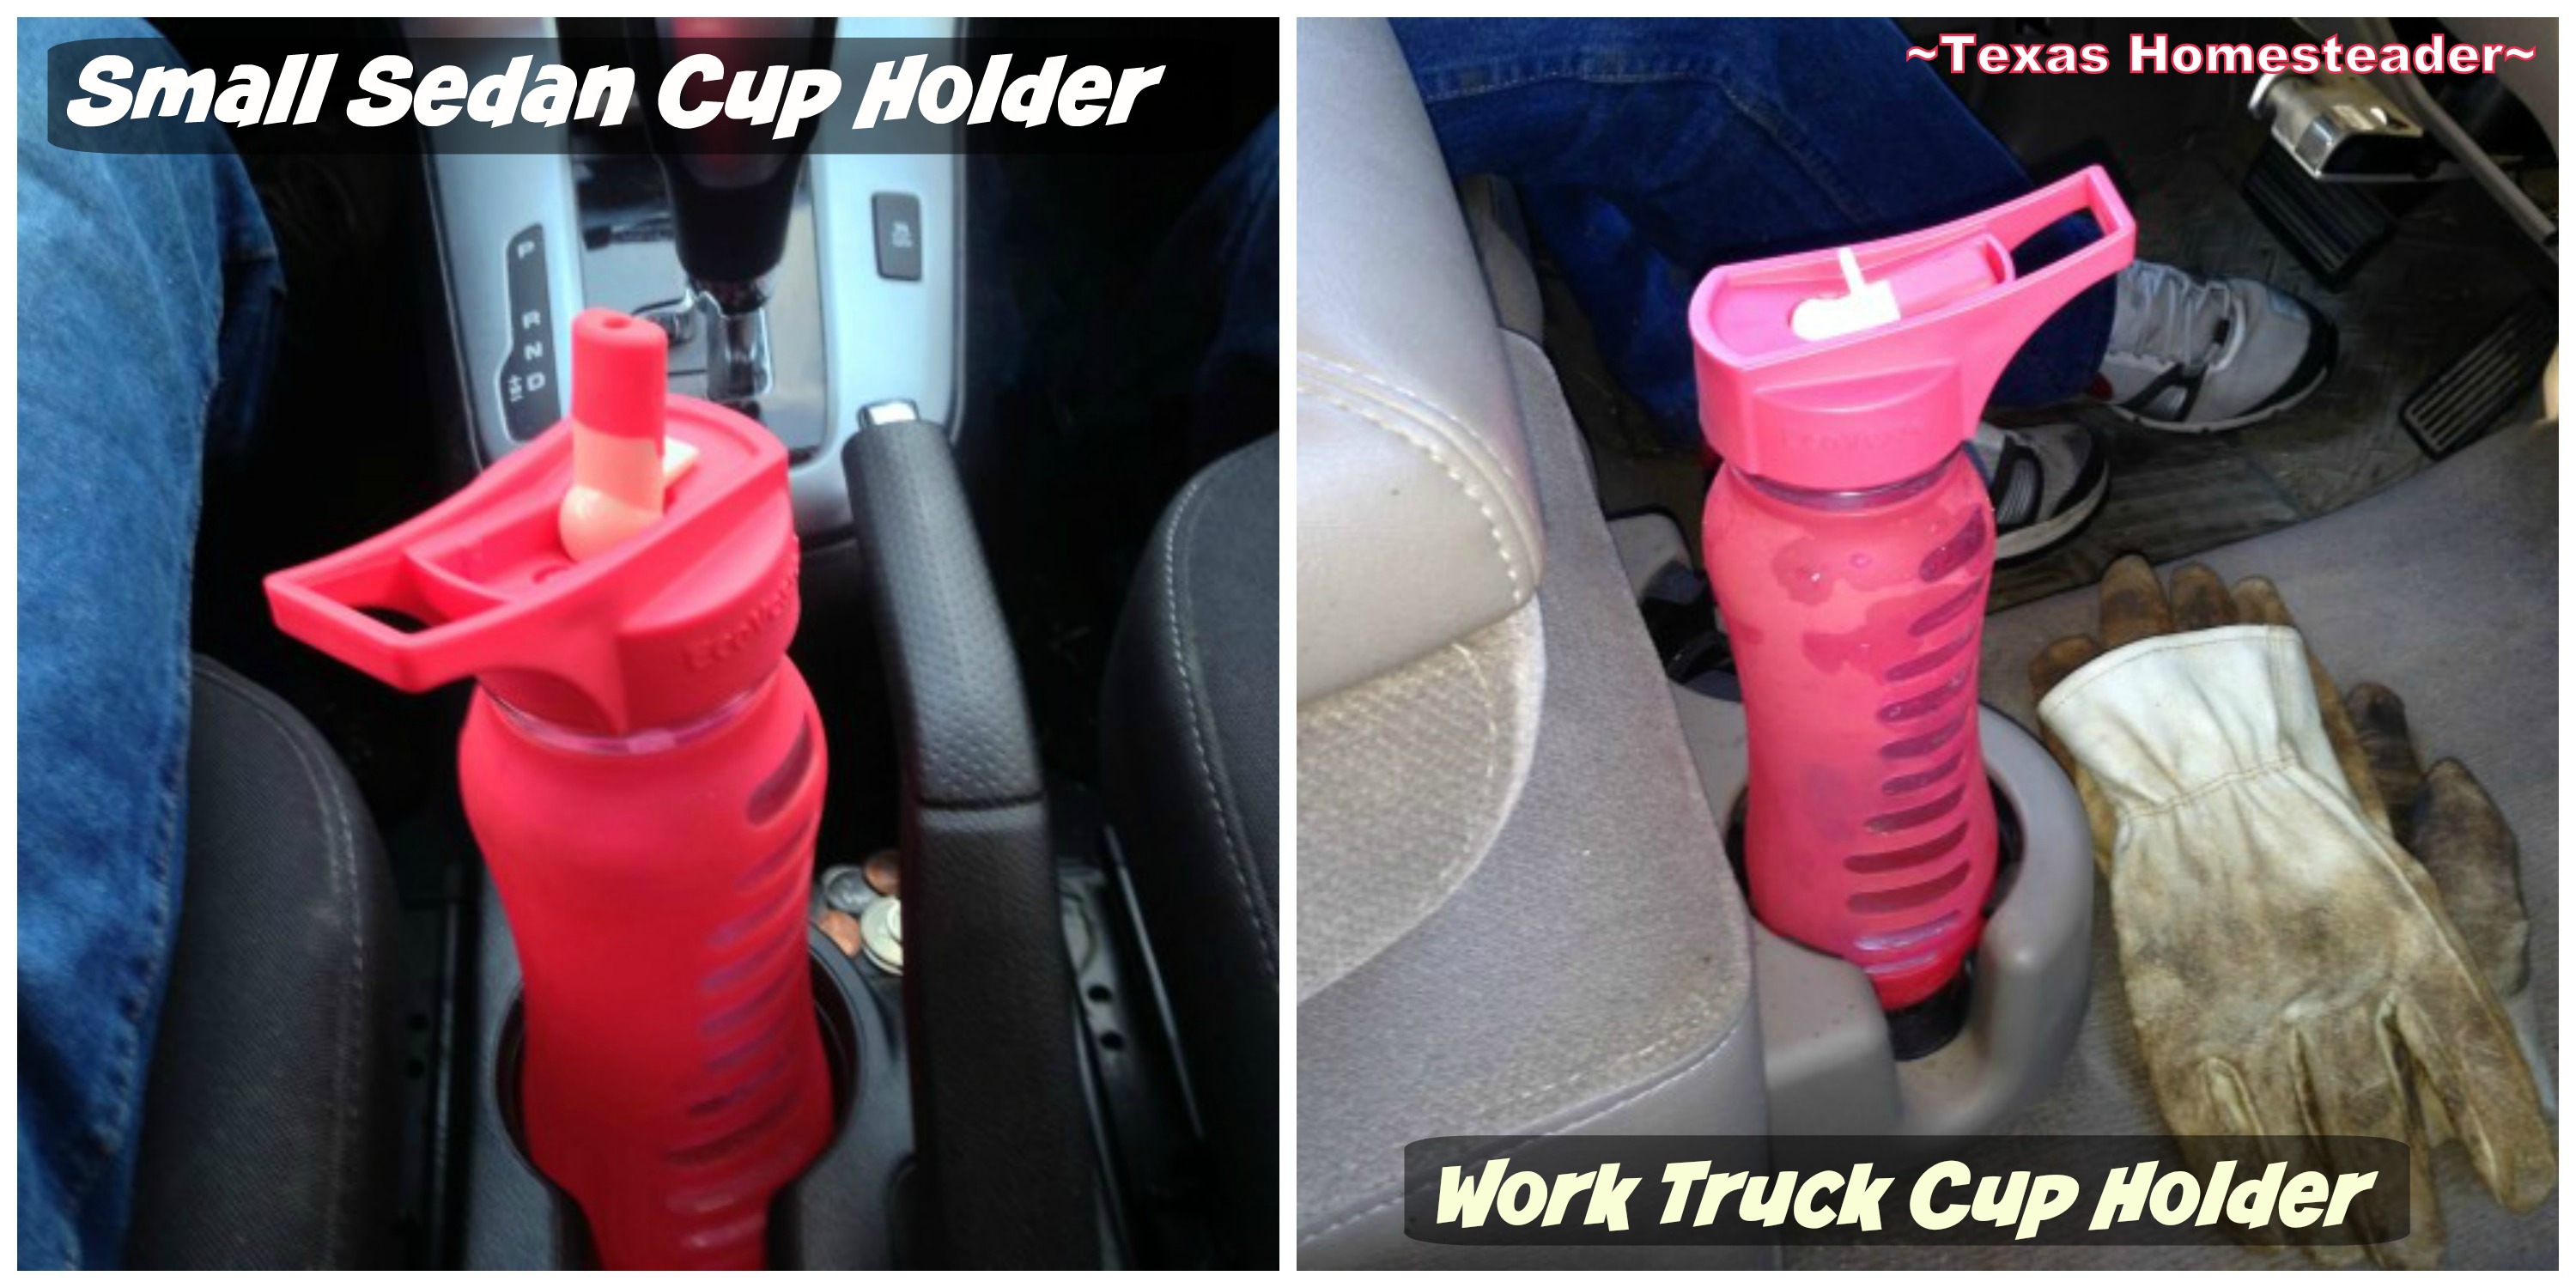 Fits in beverage holders. I hate plastic, and I hate disposable water bottles or cups. I'm reviewing a 60% Recycled GLASS reusable water bottle - see what I found. #TexasHomesteader